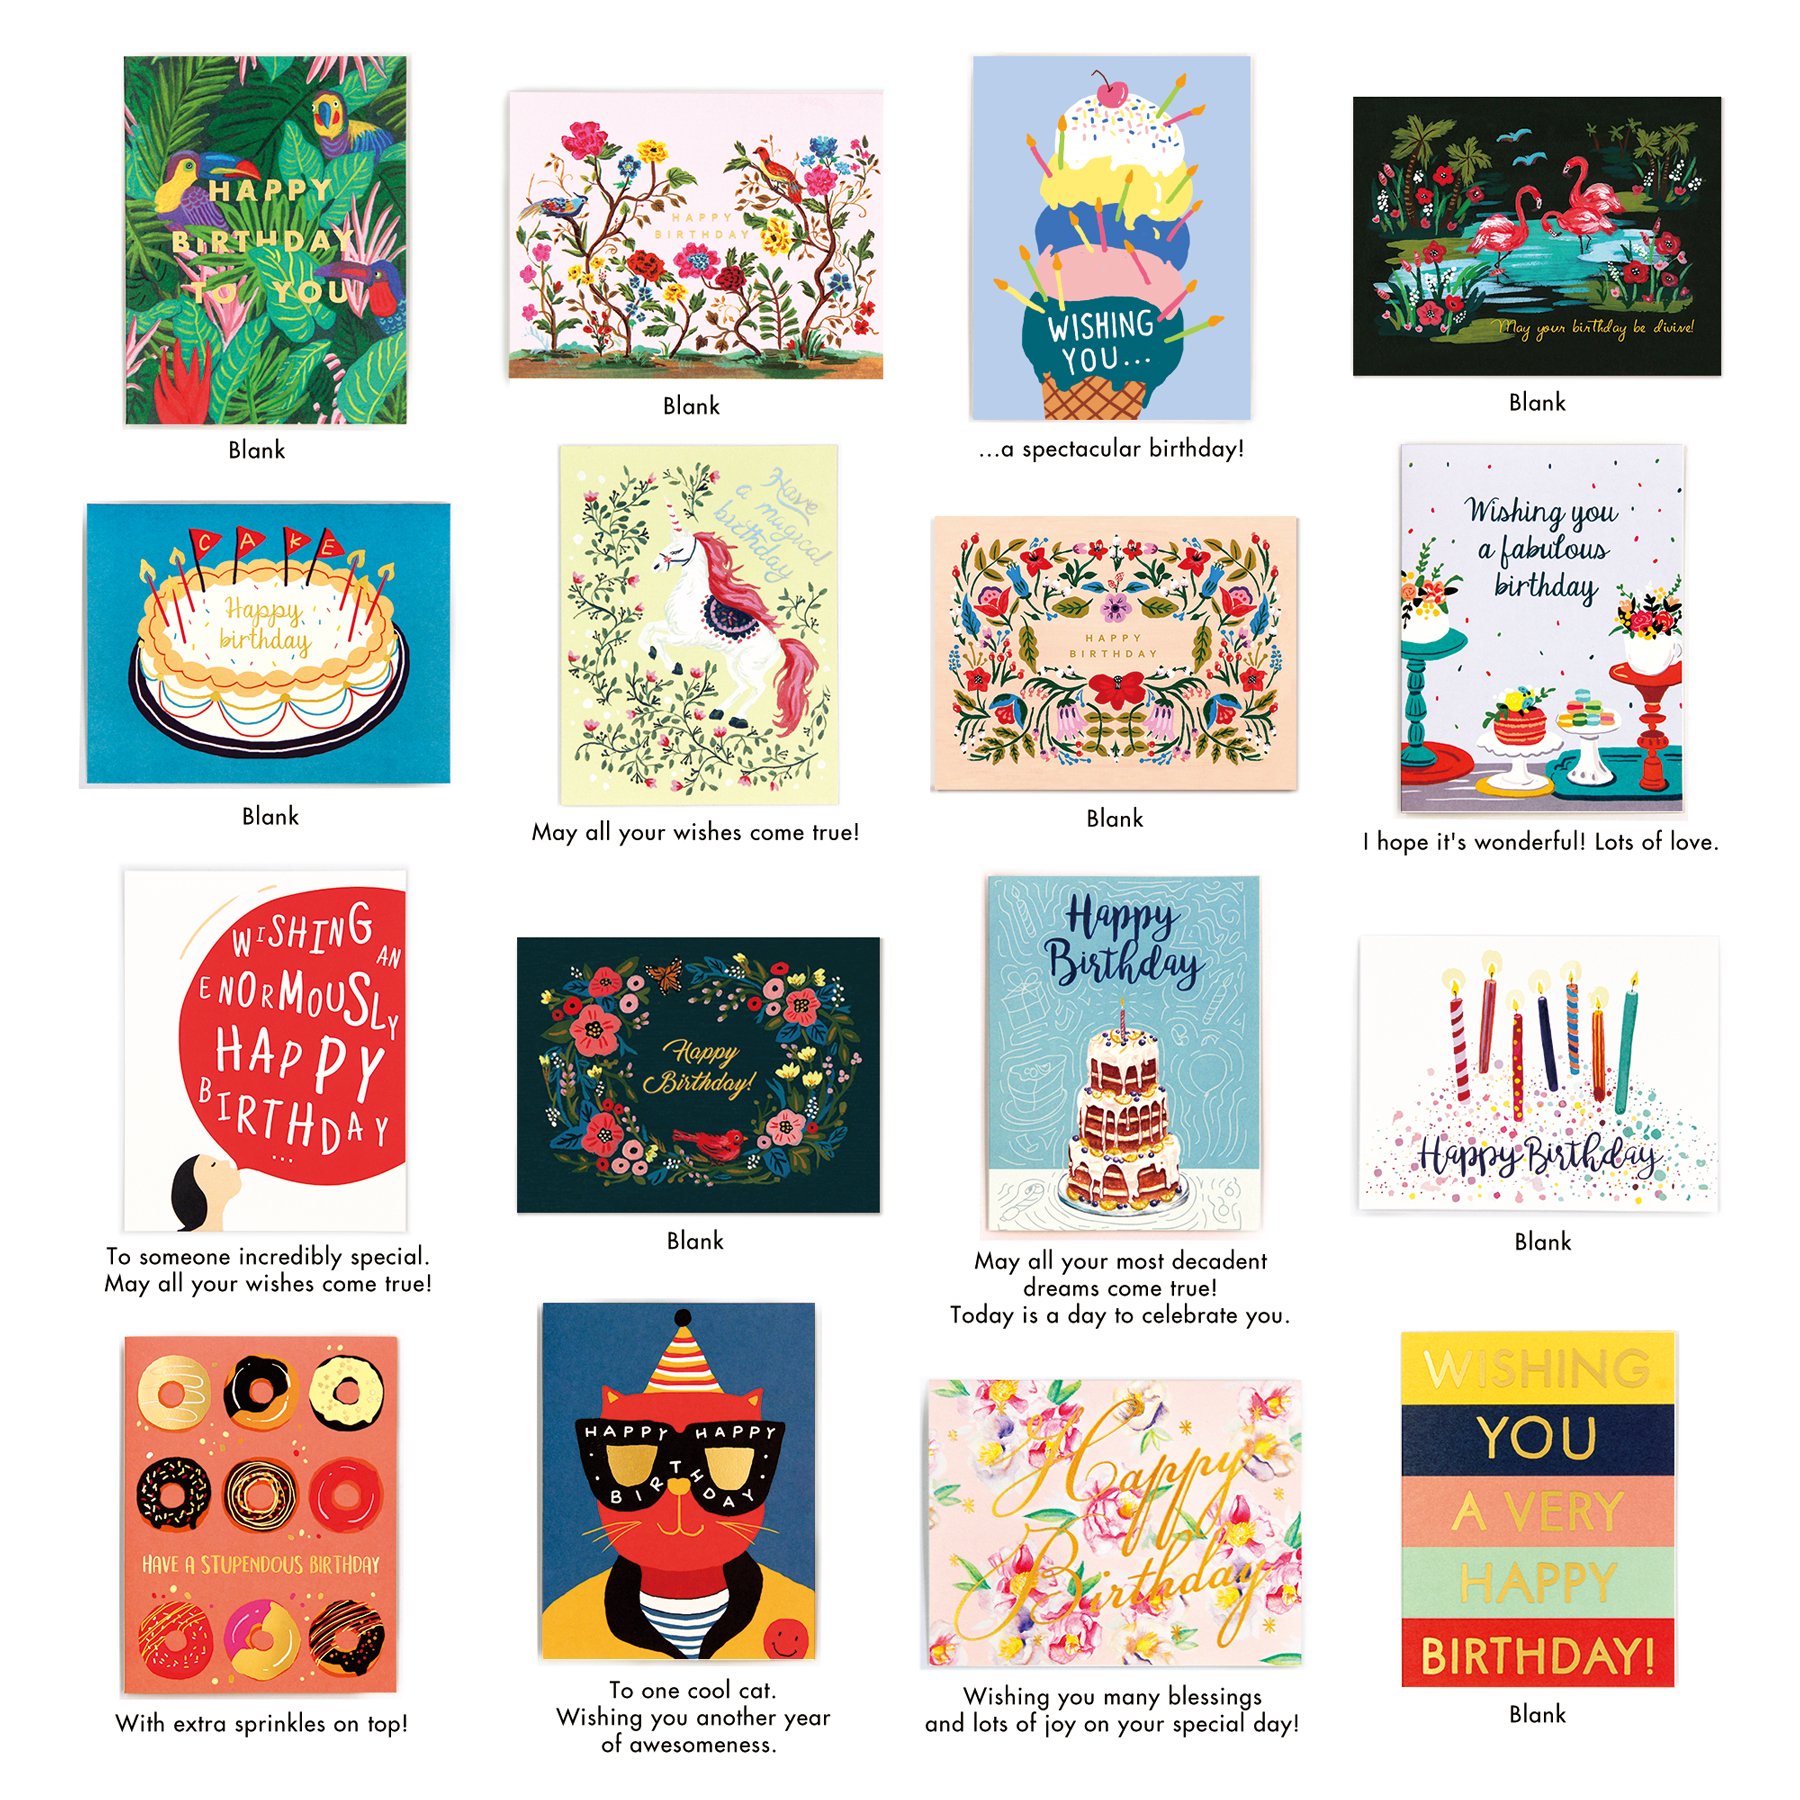 Minimalmart Birthday Cards Box Set of 32 Unique Designs Assorted Happy Birthday Premium Cards with GOLD EMBELLISHMENTS – Boxed Assortment Pack with Envelopes -Birthday Wishes Greeting Cards